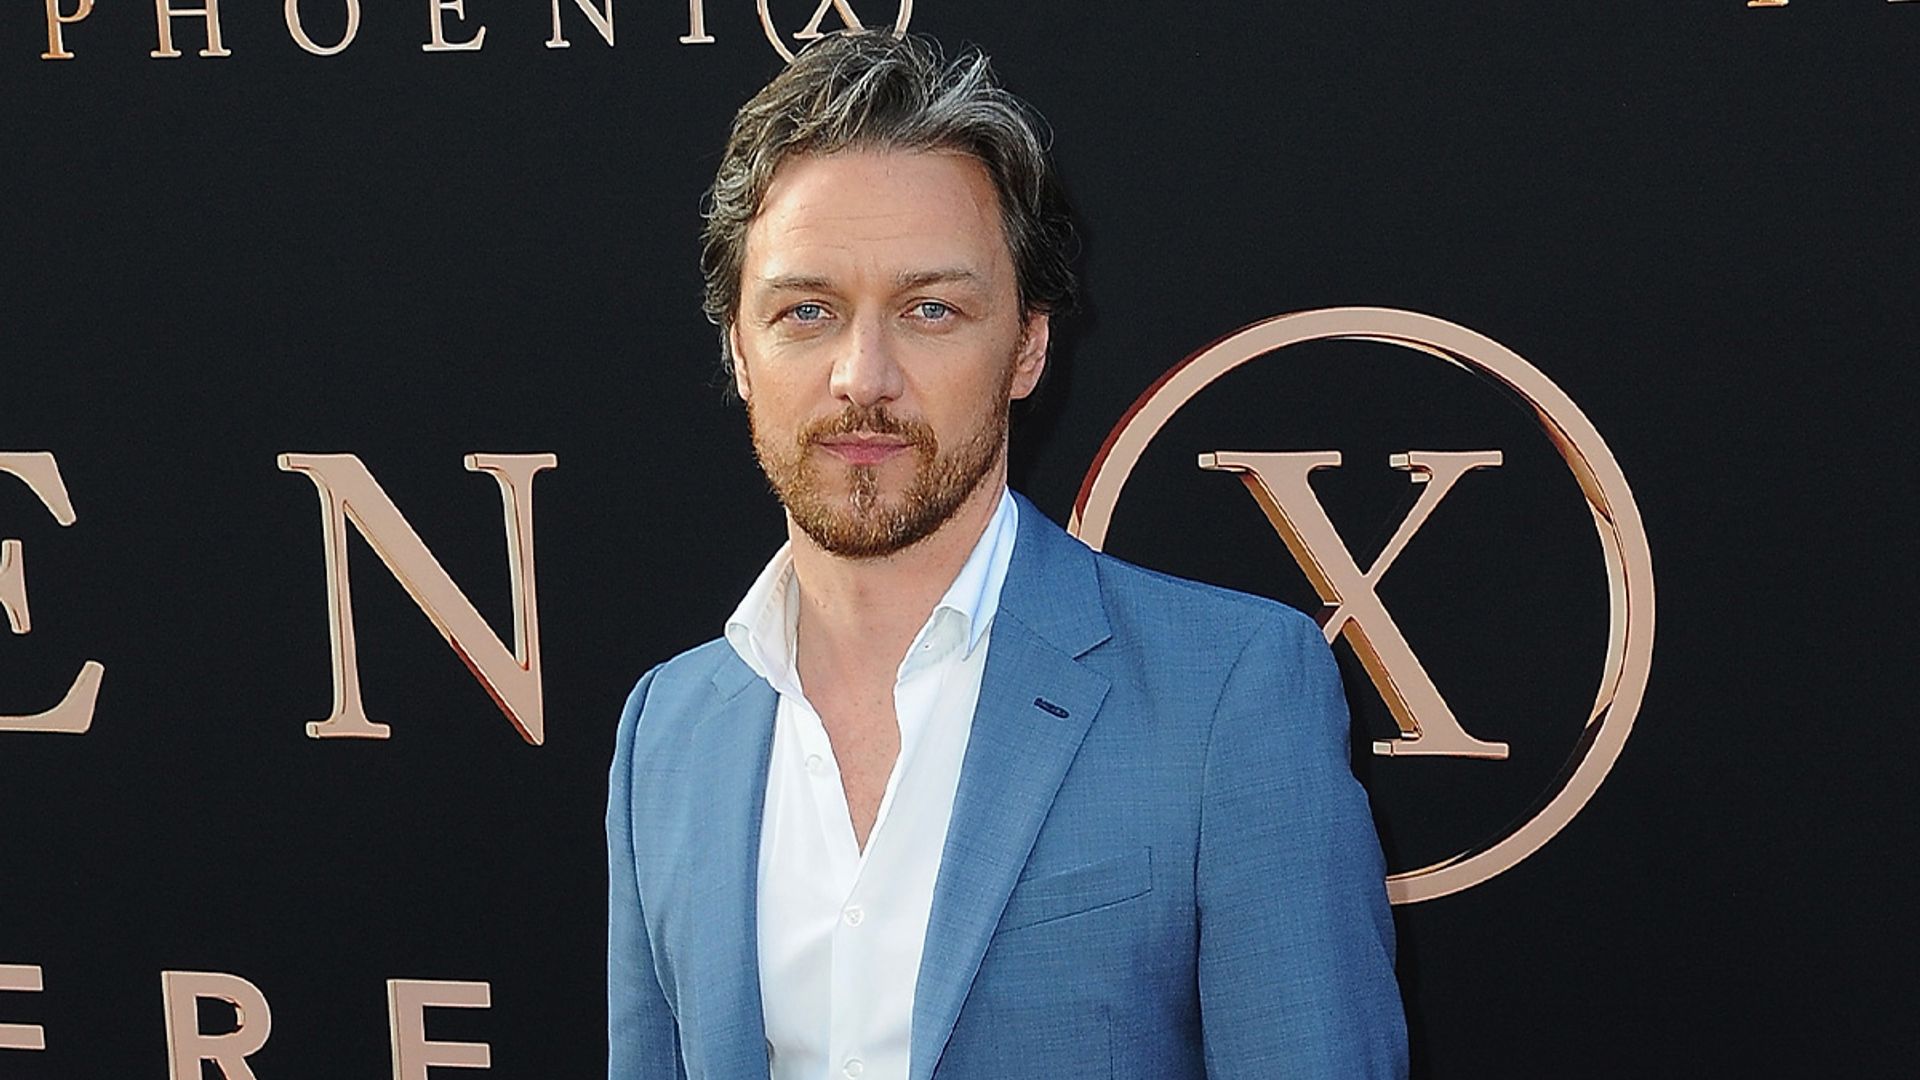 James McAvoy's palatial London home with girlfriend revealed